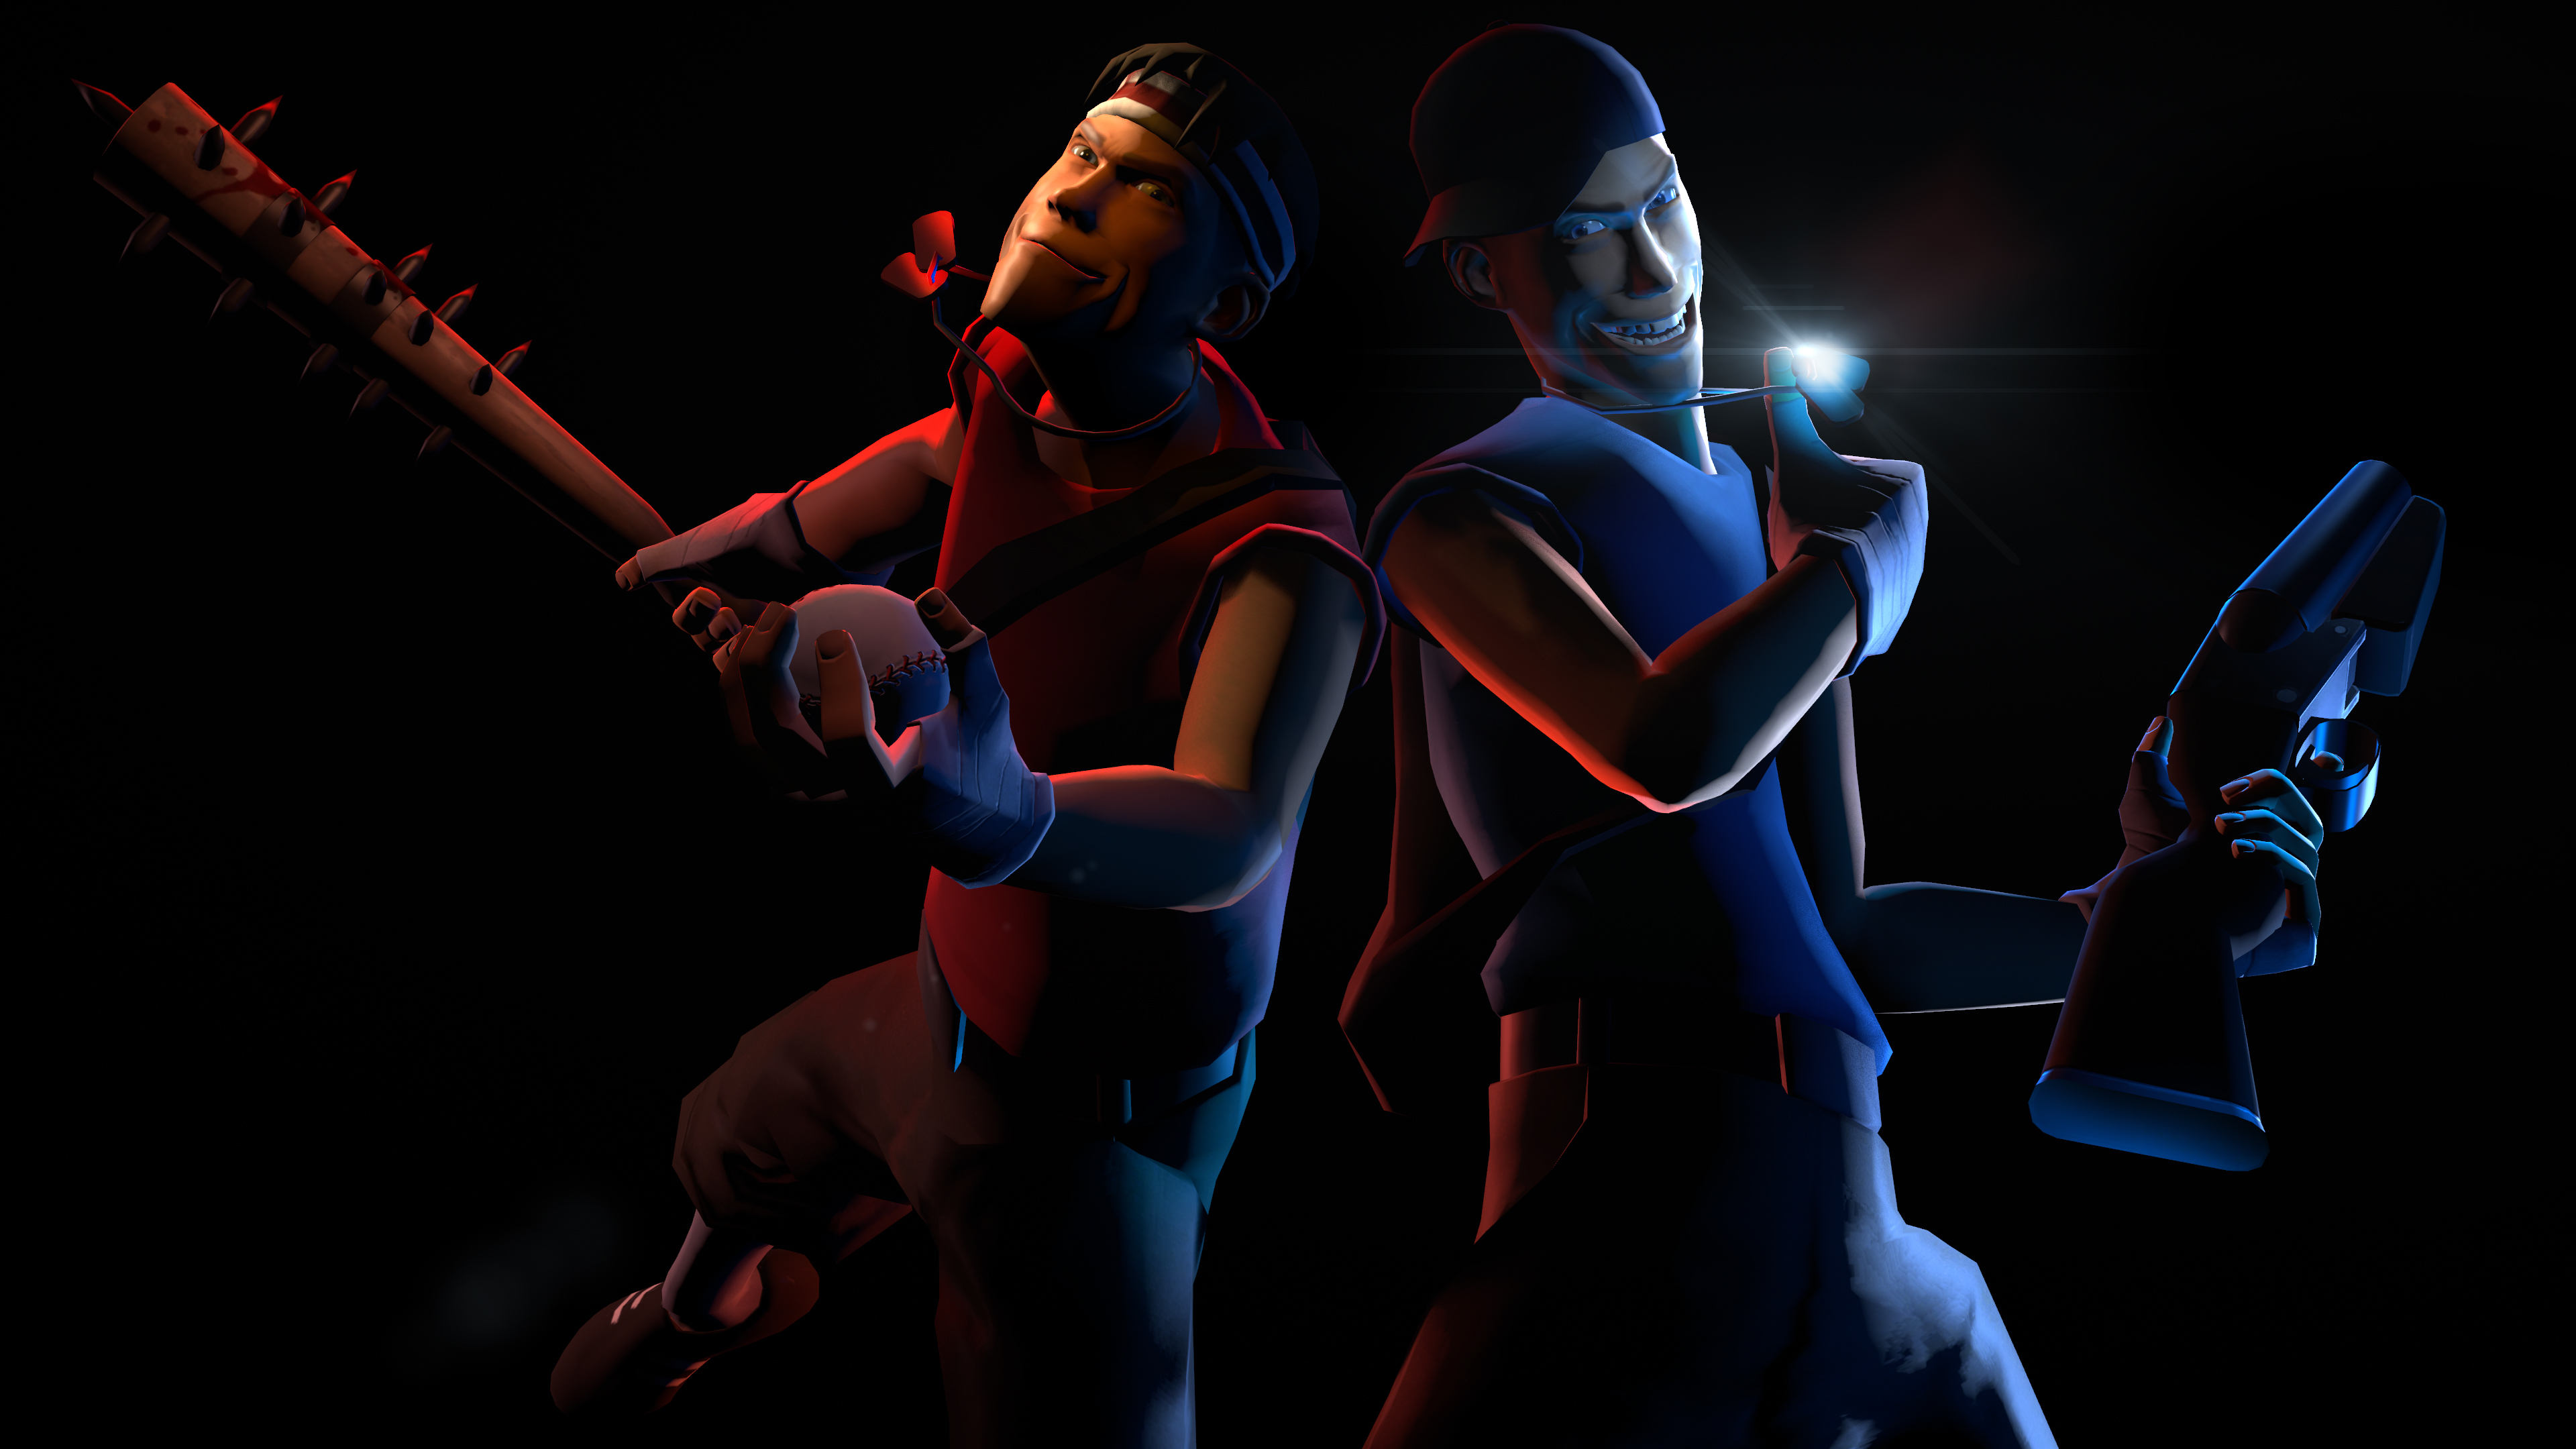 Video Game Team Fortress 2 3840x2160